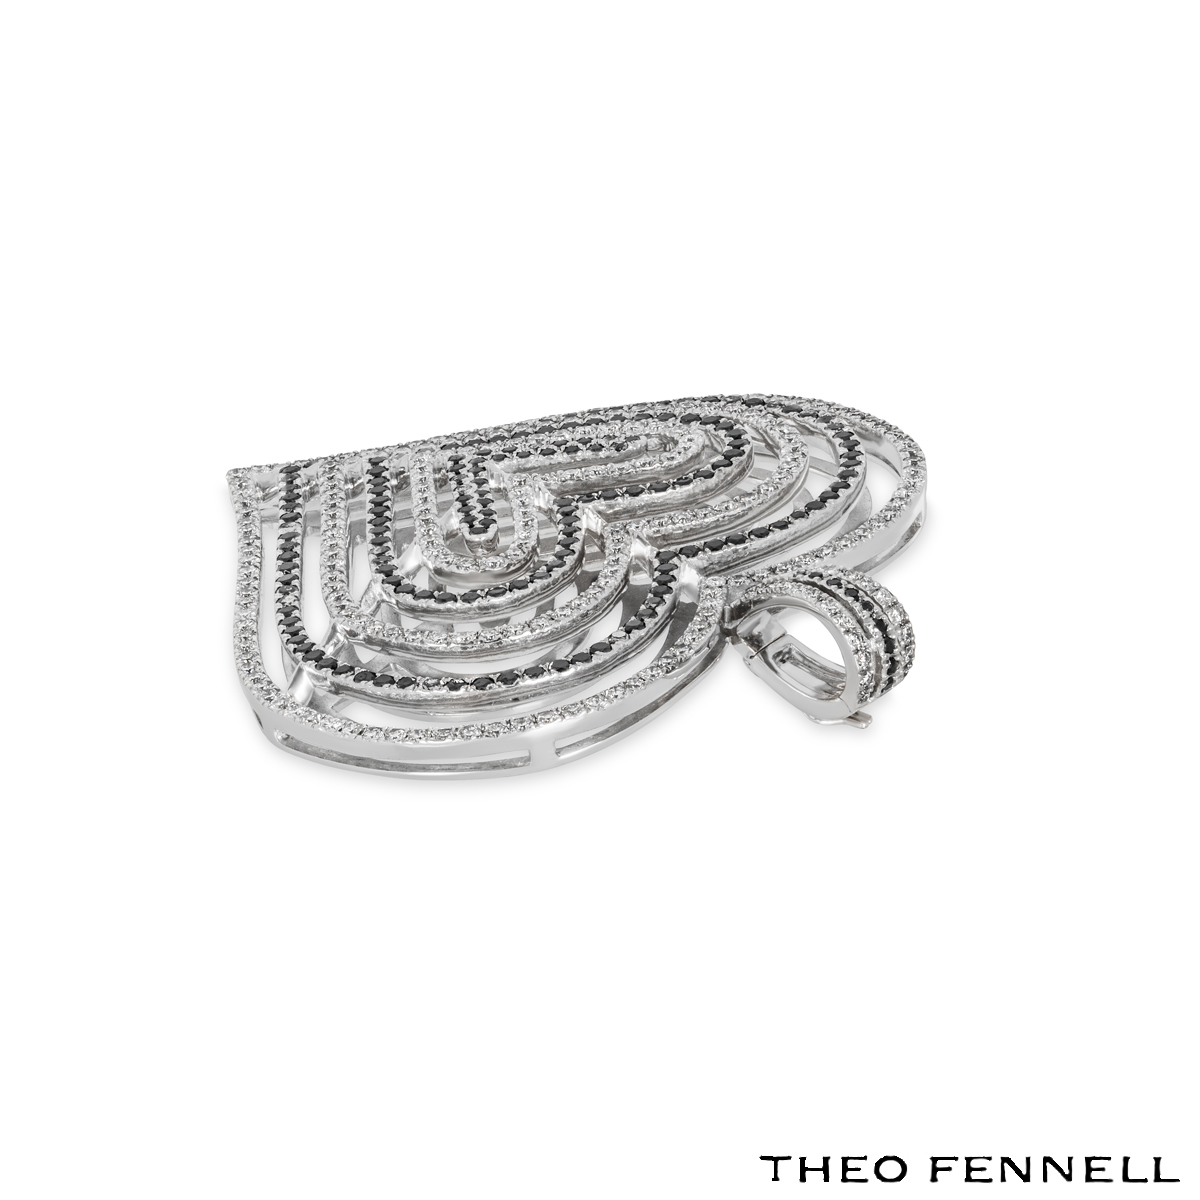 Theo Fennell White Gold Diamond Pendant 2.62ct